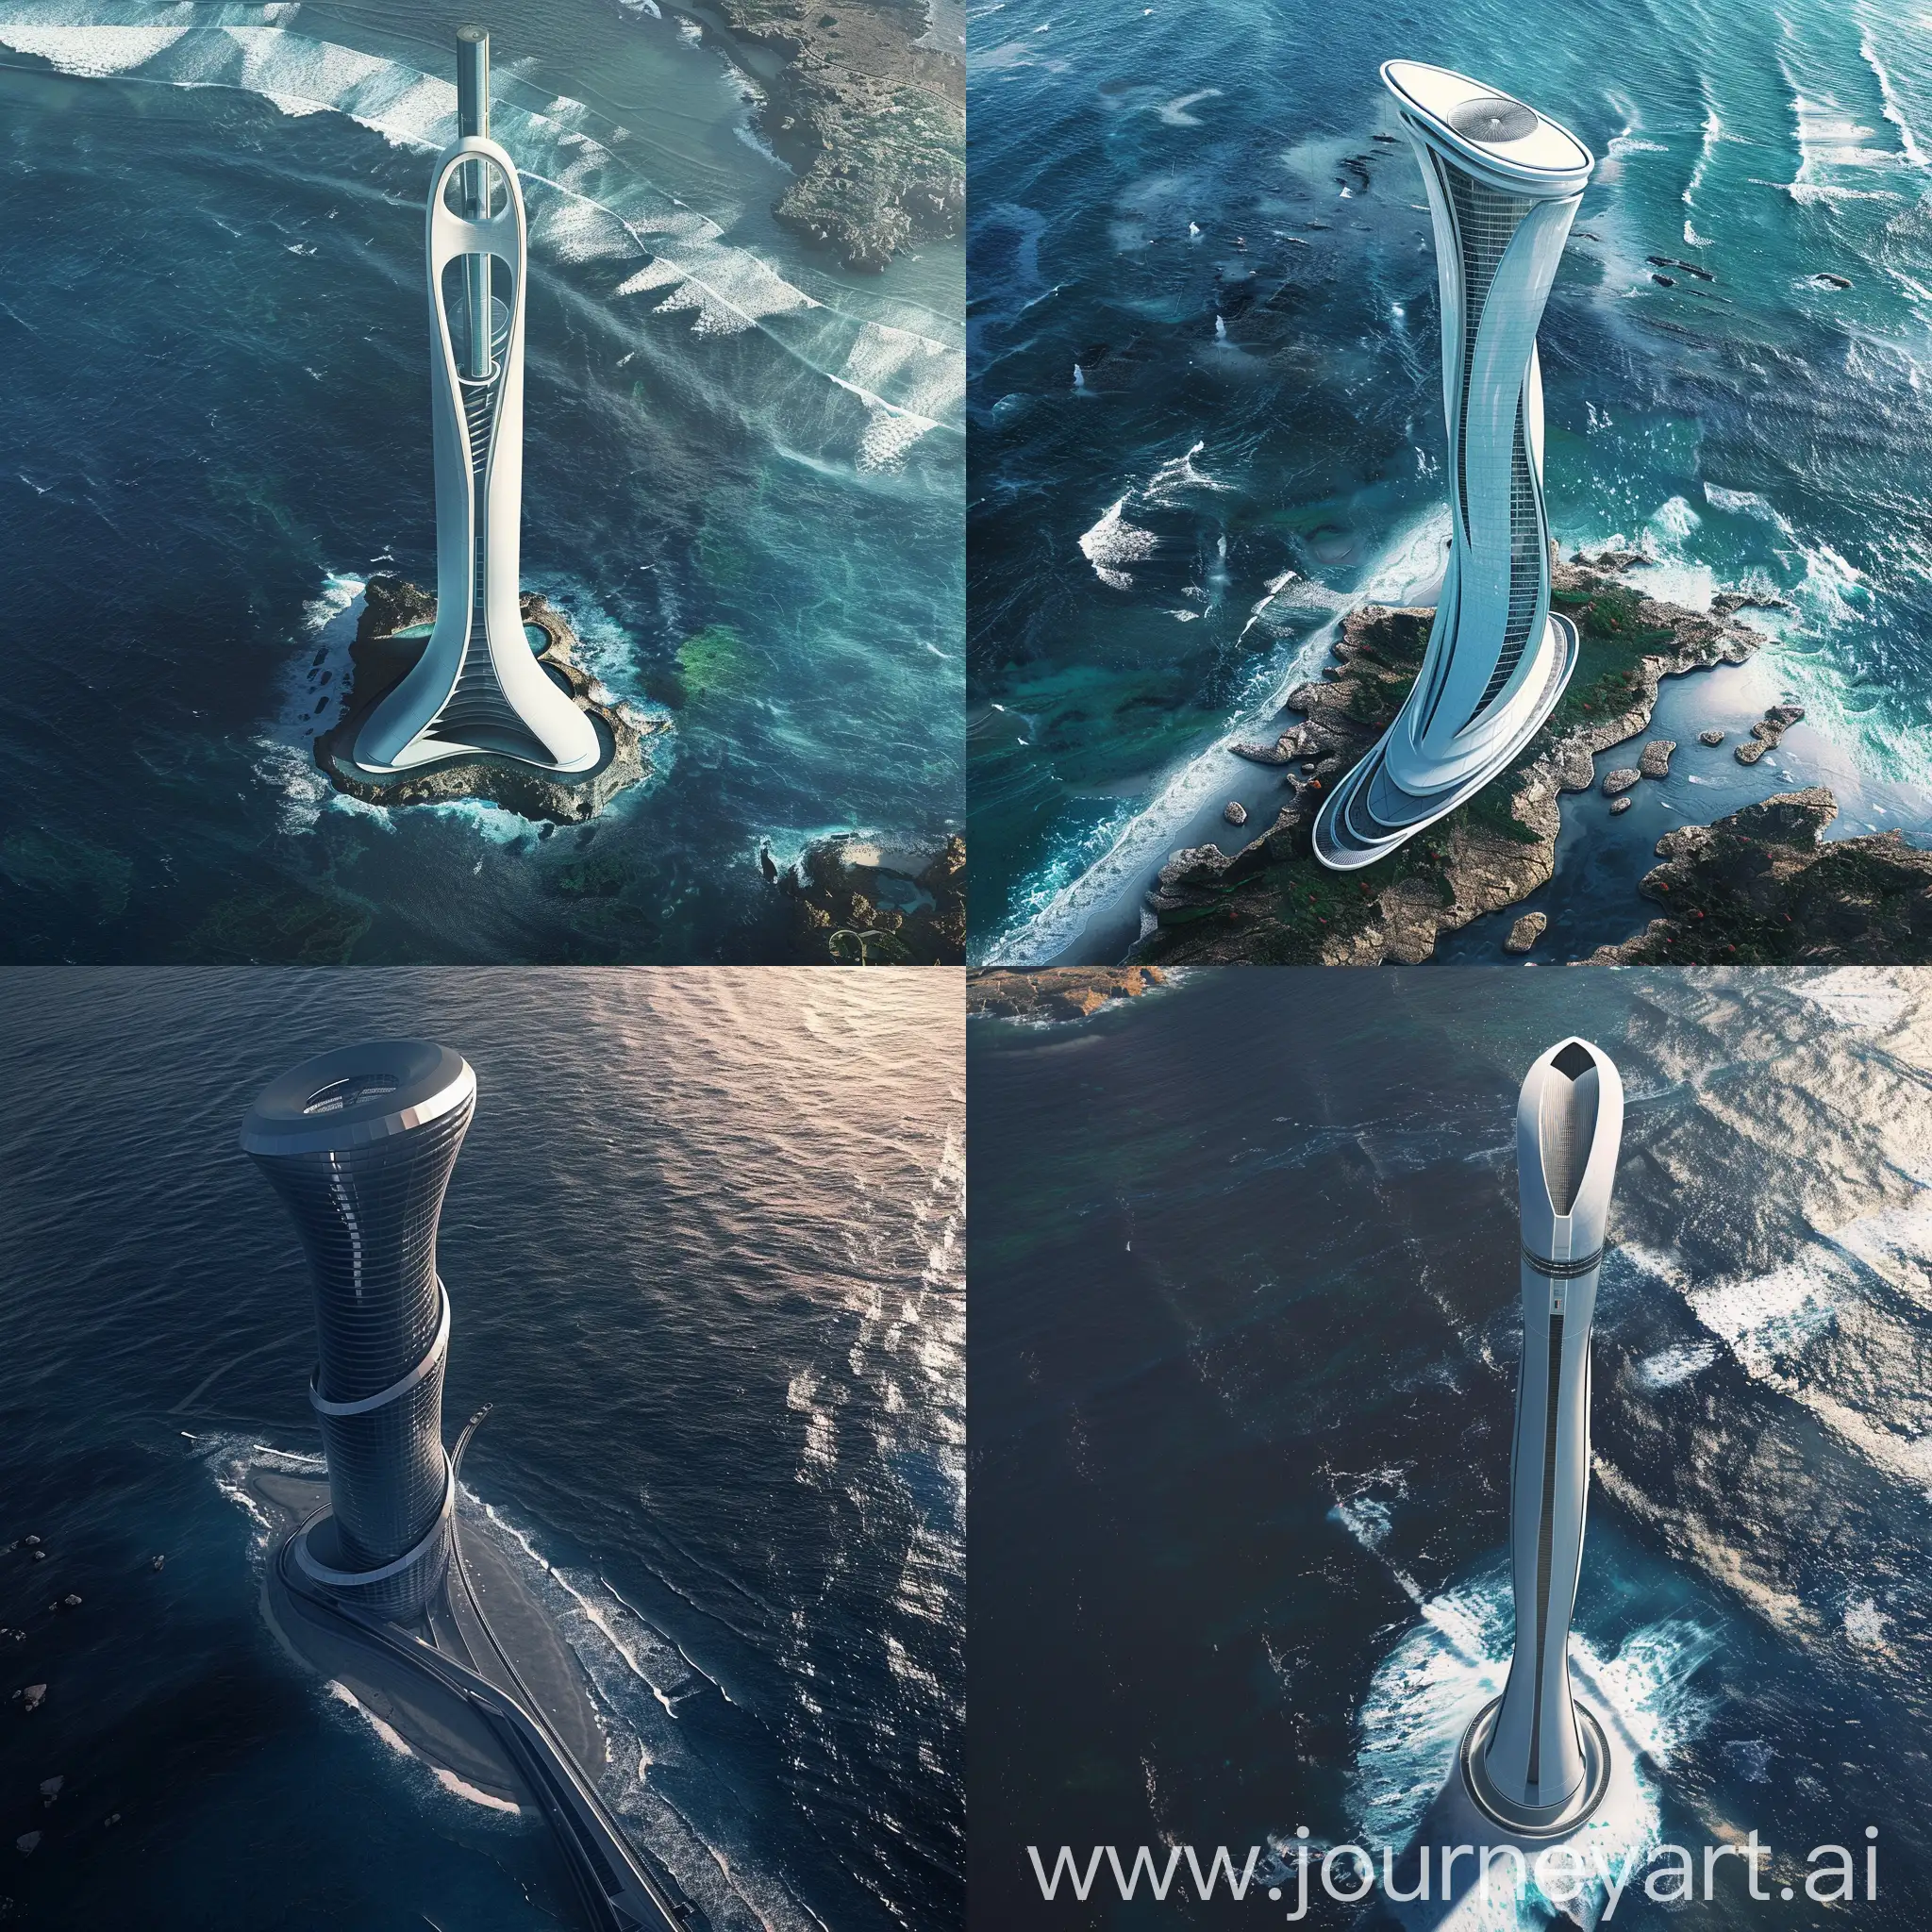 Imagine a futuristic ATC tower rising from the ocean, its sleek design inspired by the graceful curves of ocean waves. The aerial view reveals a stunning blend of modern architecture and natural beauty.